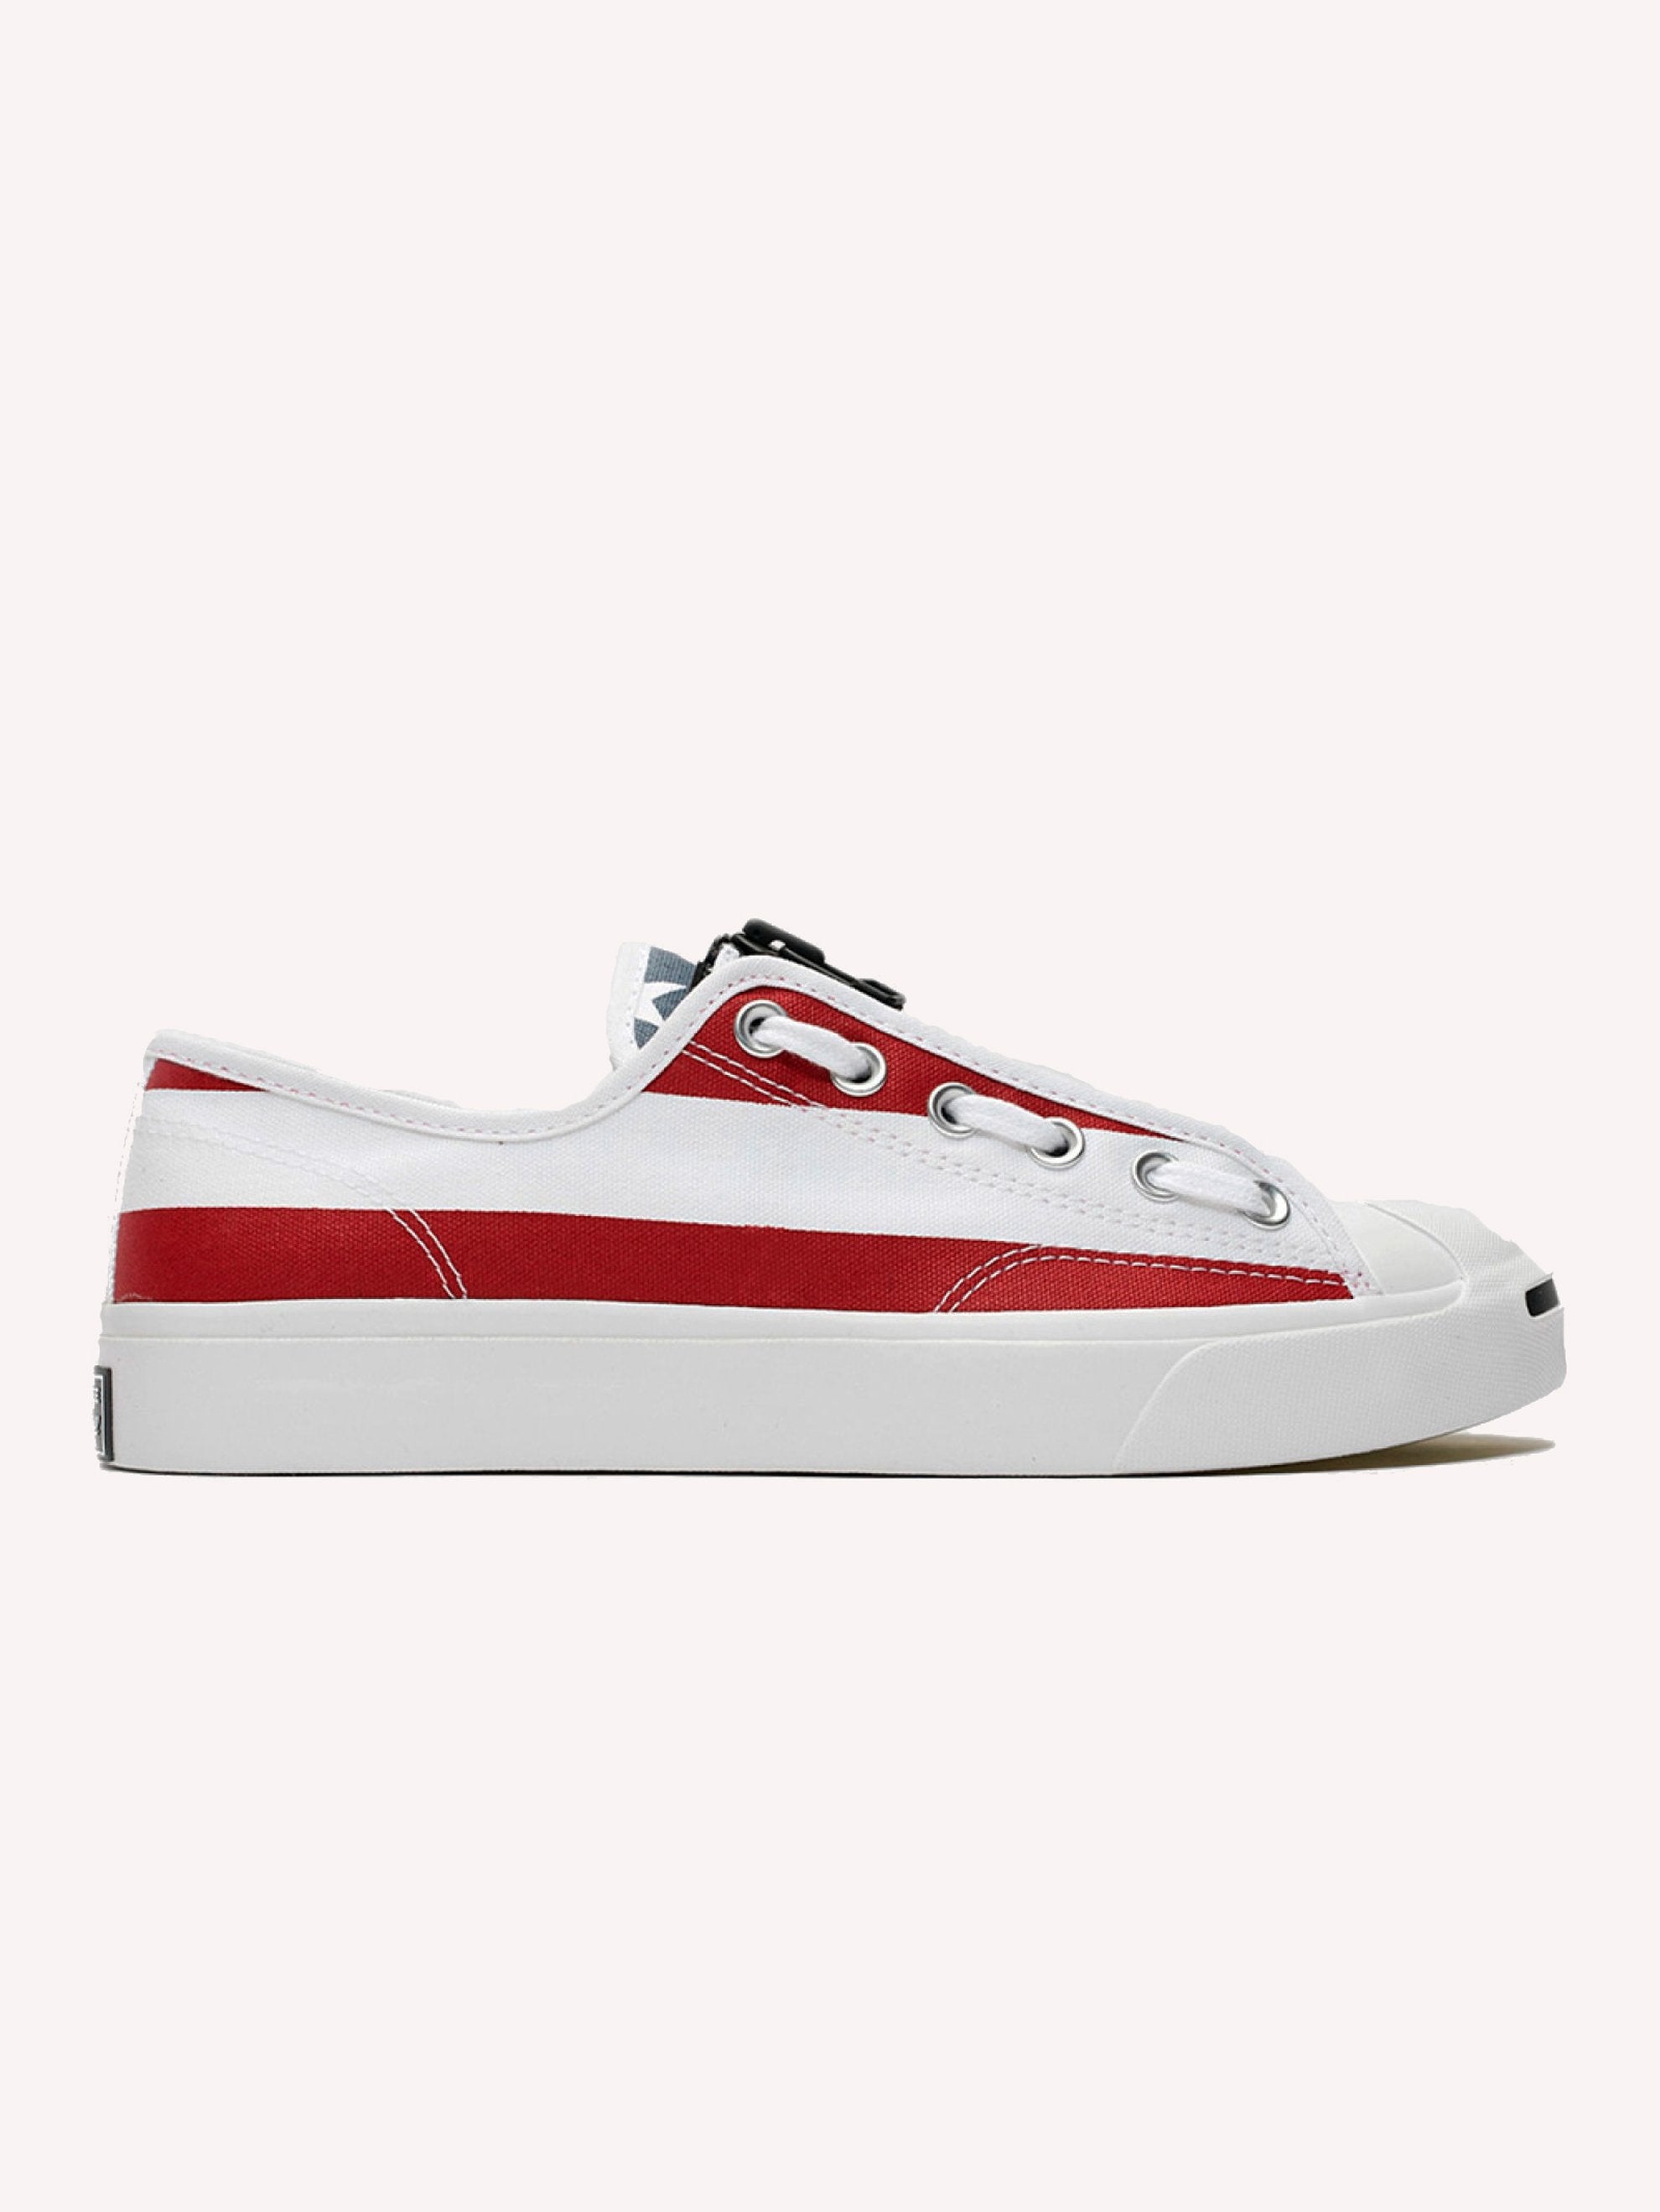 converse jack purcell india